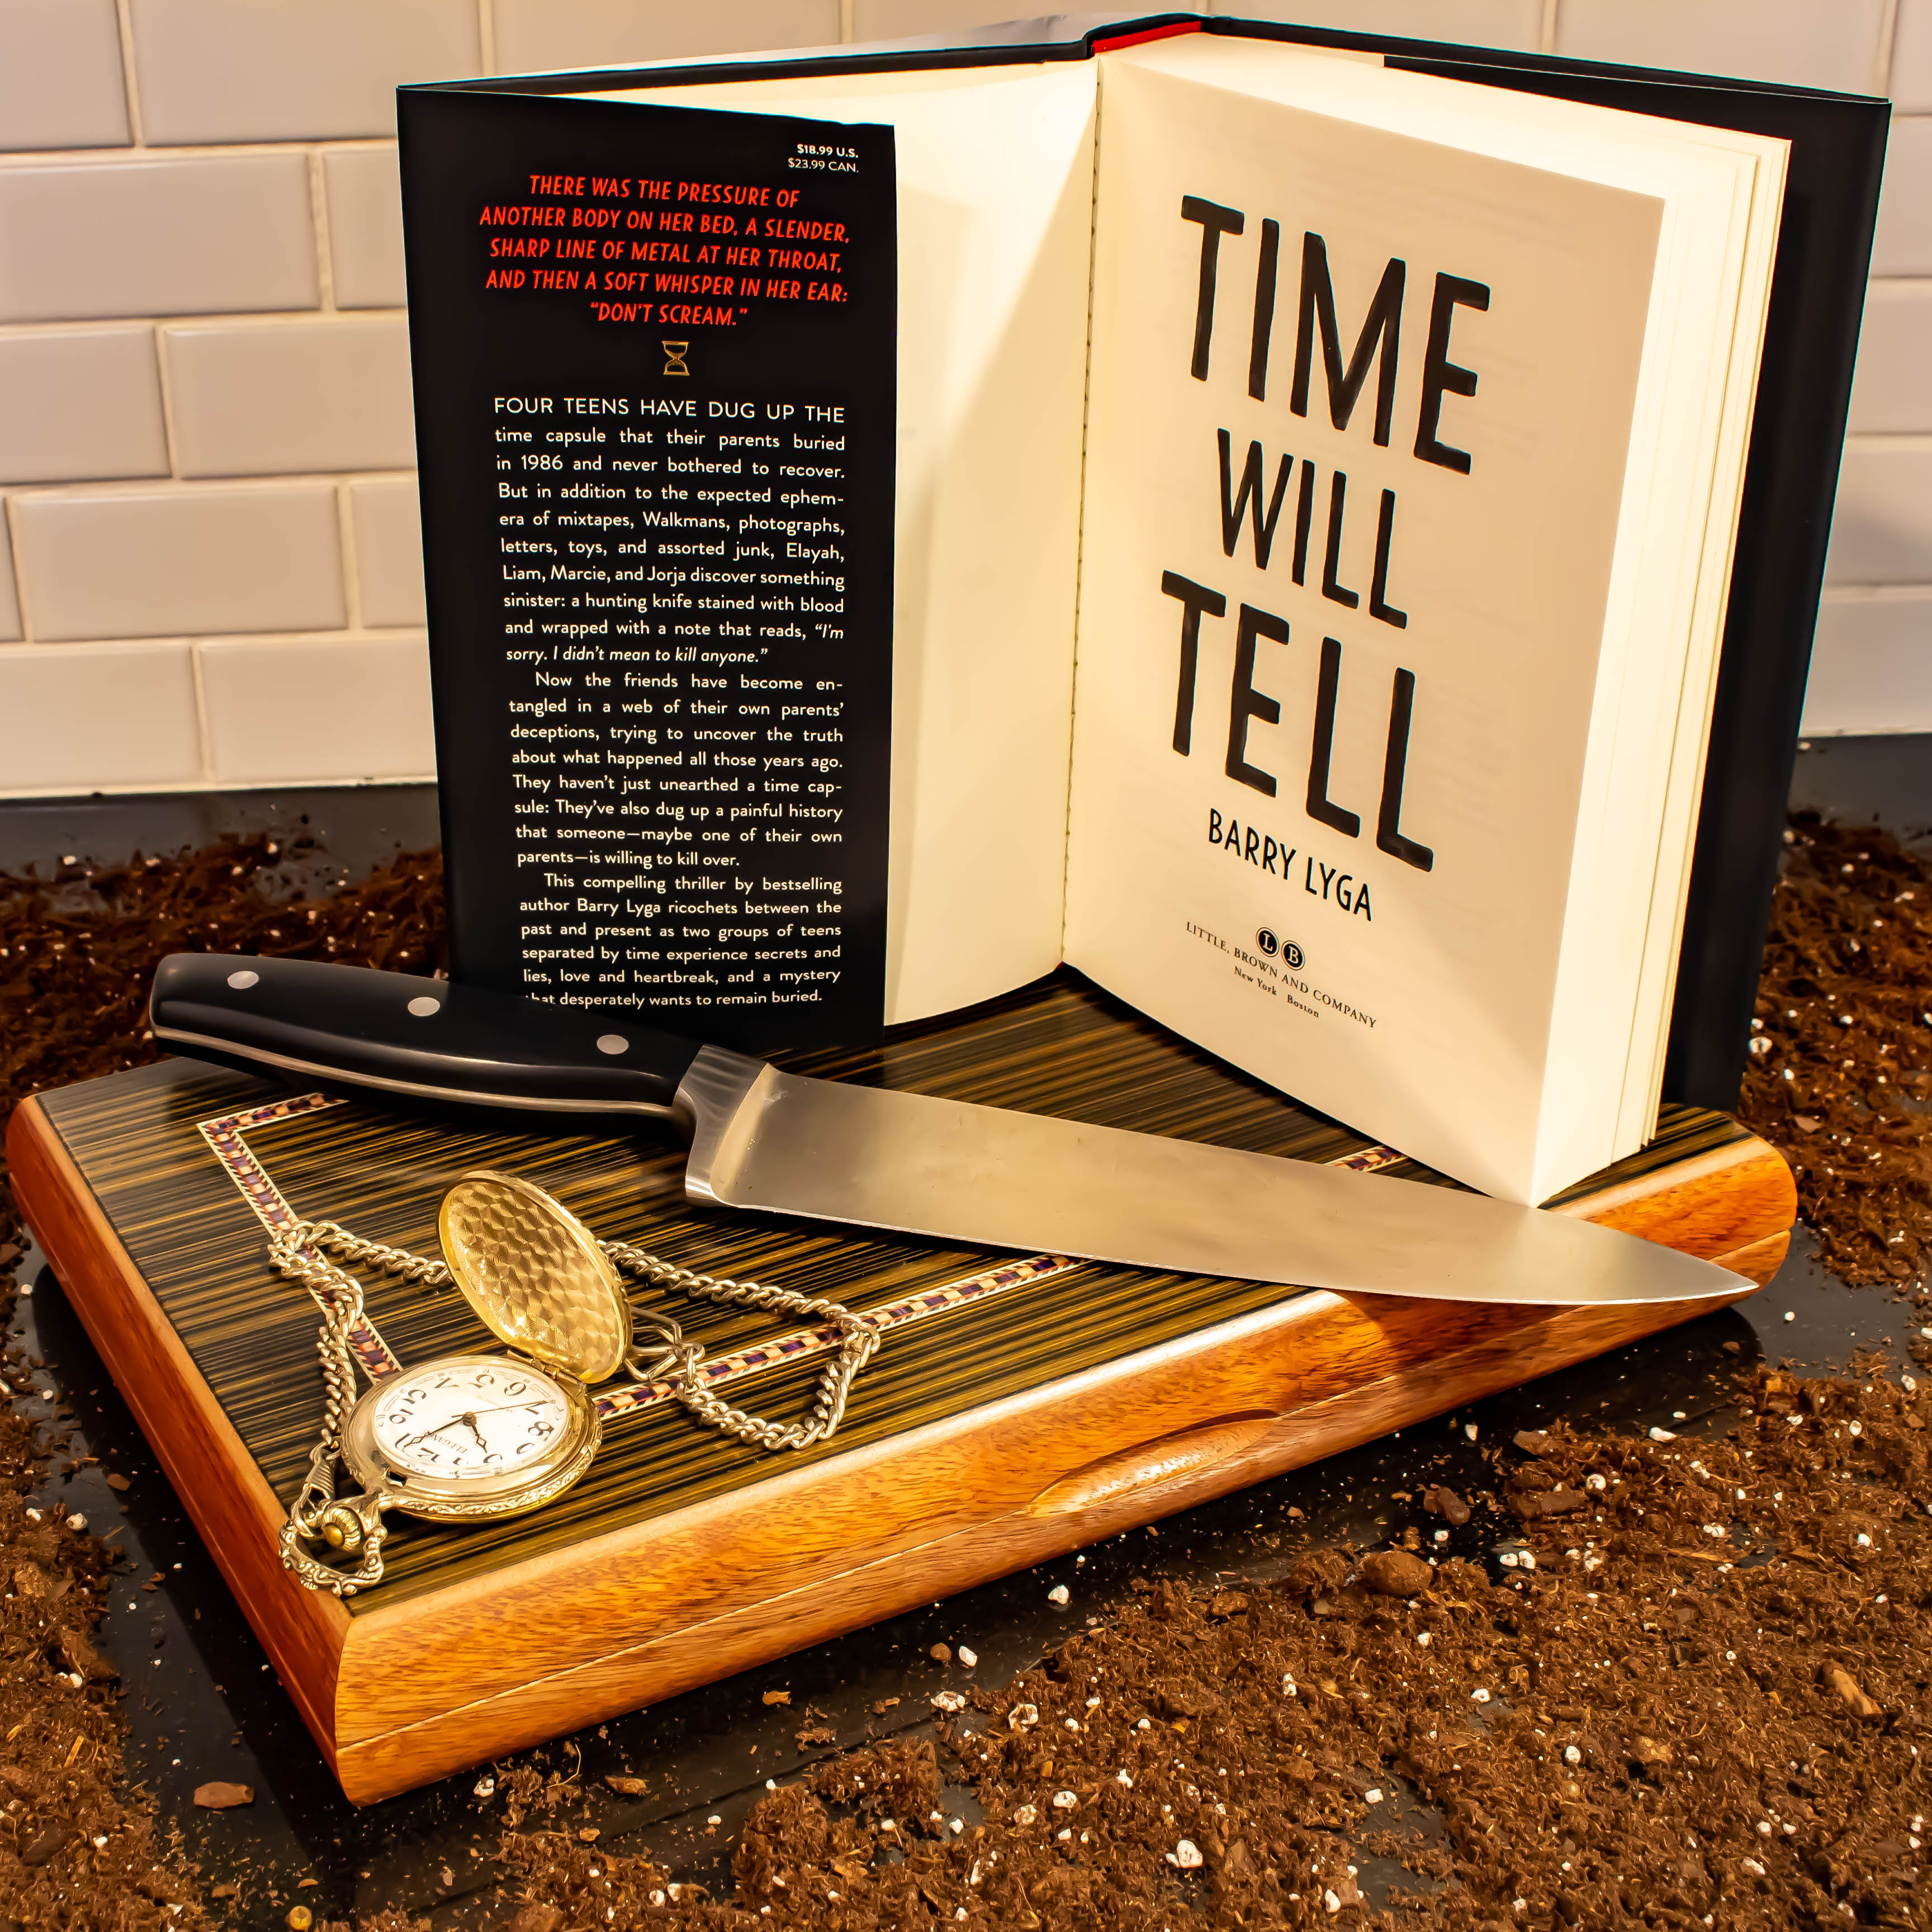 Instagram image of book cover for 'Time Will Tell' by Barry Lyga